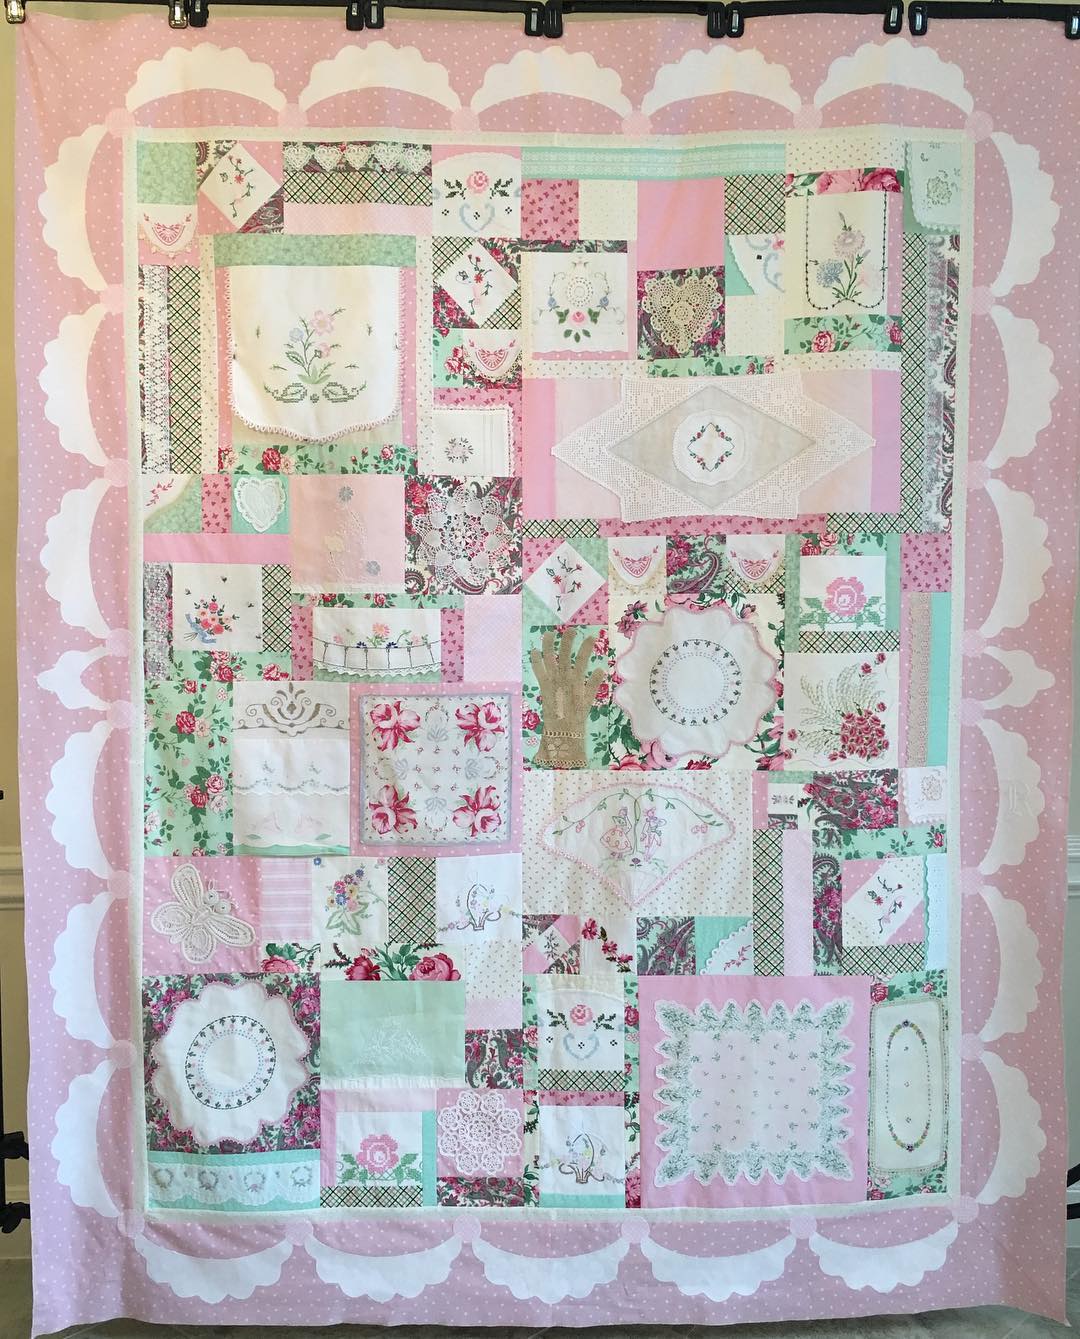 Communique Quilt variation by Rhonda Cox Dort featuring vintage linens in green and pink